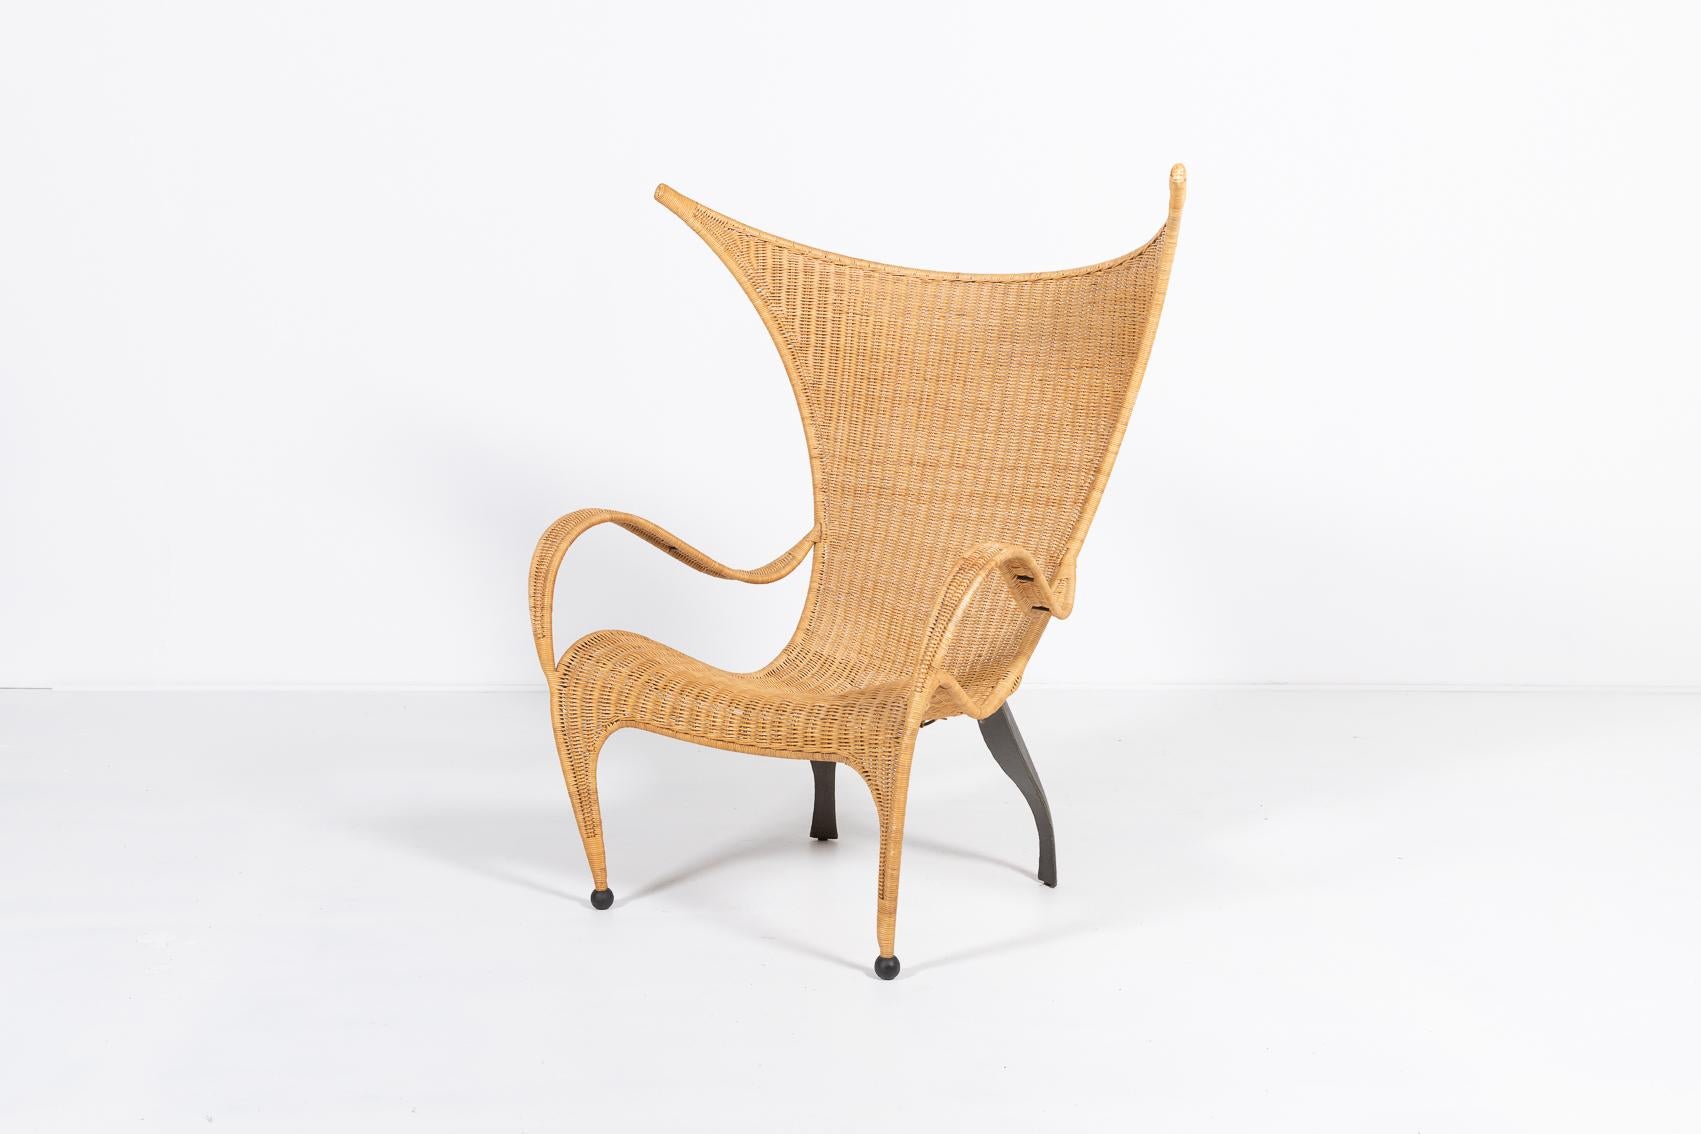 Sculptural Italian design armchair with casted steel frame and wicker seat. Spectacular shape chair which becomes an eye catcher in any interior.

Condition
Good, usage marks

Dimensions
width: 34,64 inch
height: 49,60 inch
depth: 27,56 inch
seat